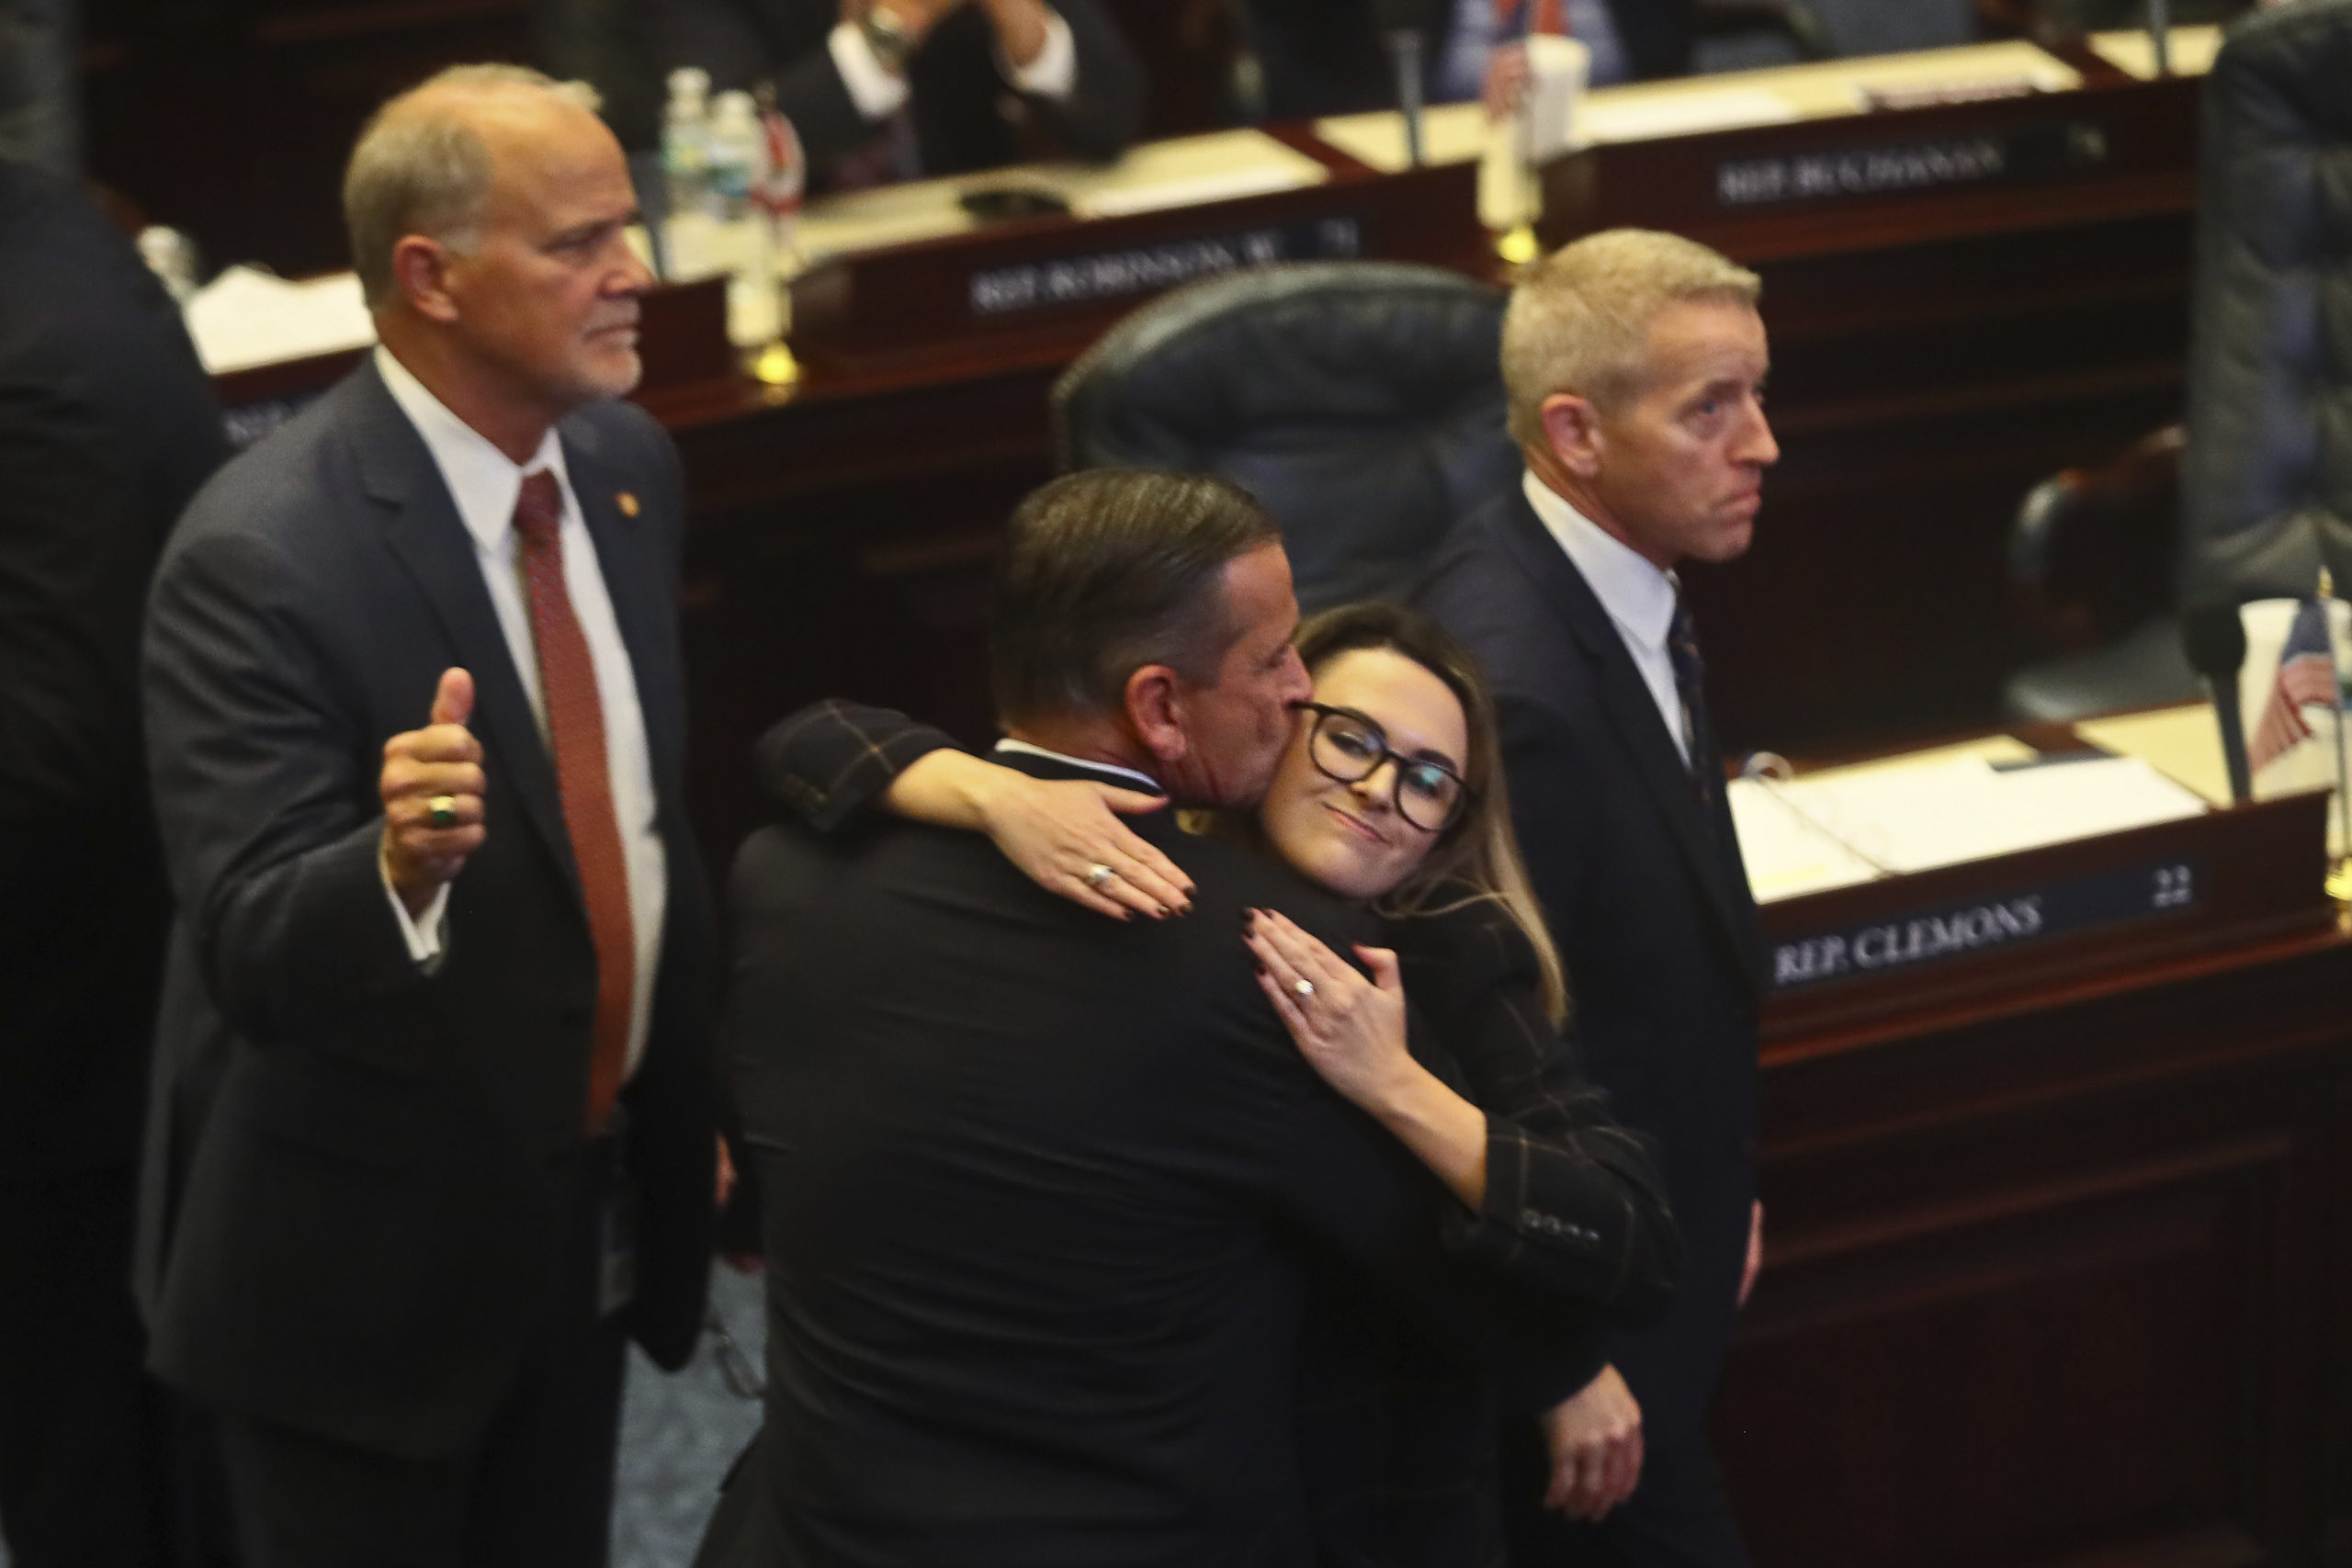 Florida Republican Rep. Bob Rommel of Naples, center, is hugged by Rep. Josie Tomkow of Polk City after his SB 2-A property insurance bill he co-sponsored passed Wednesday in the Florida House of Representatives. At left is Rep. Bobby Payne, R-Palatka; at right is House Speaker Paul Renner, R-Palm Coast. Florida lawmakers are meeting to consider ways to shore up the state's struggling home insurance market in the year's second special session devoted to the topic.